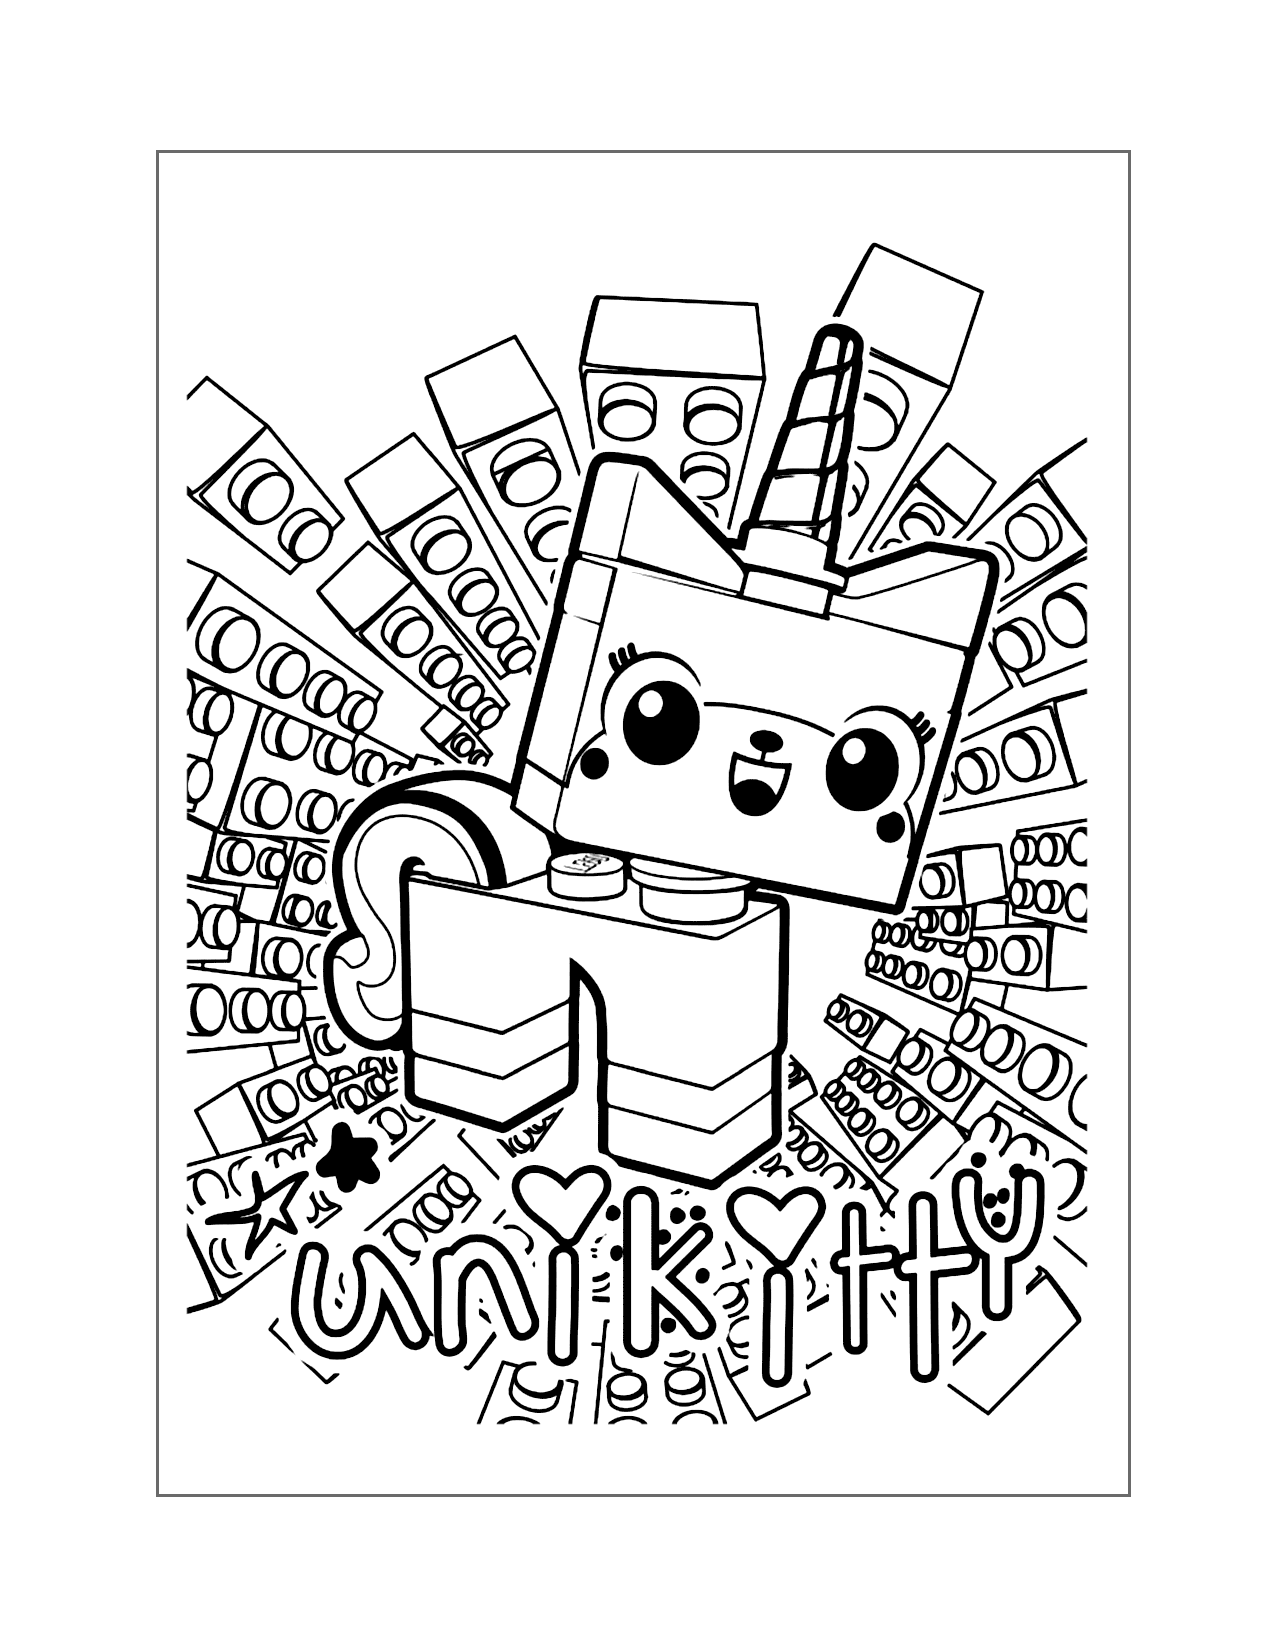 Unikitty Lego Coloring Page